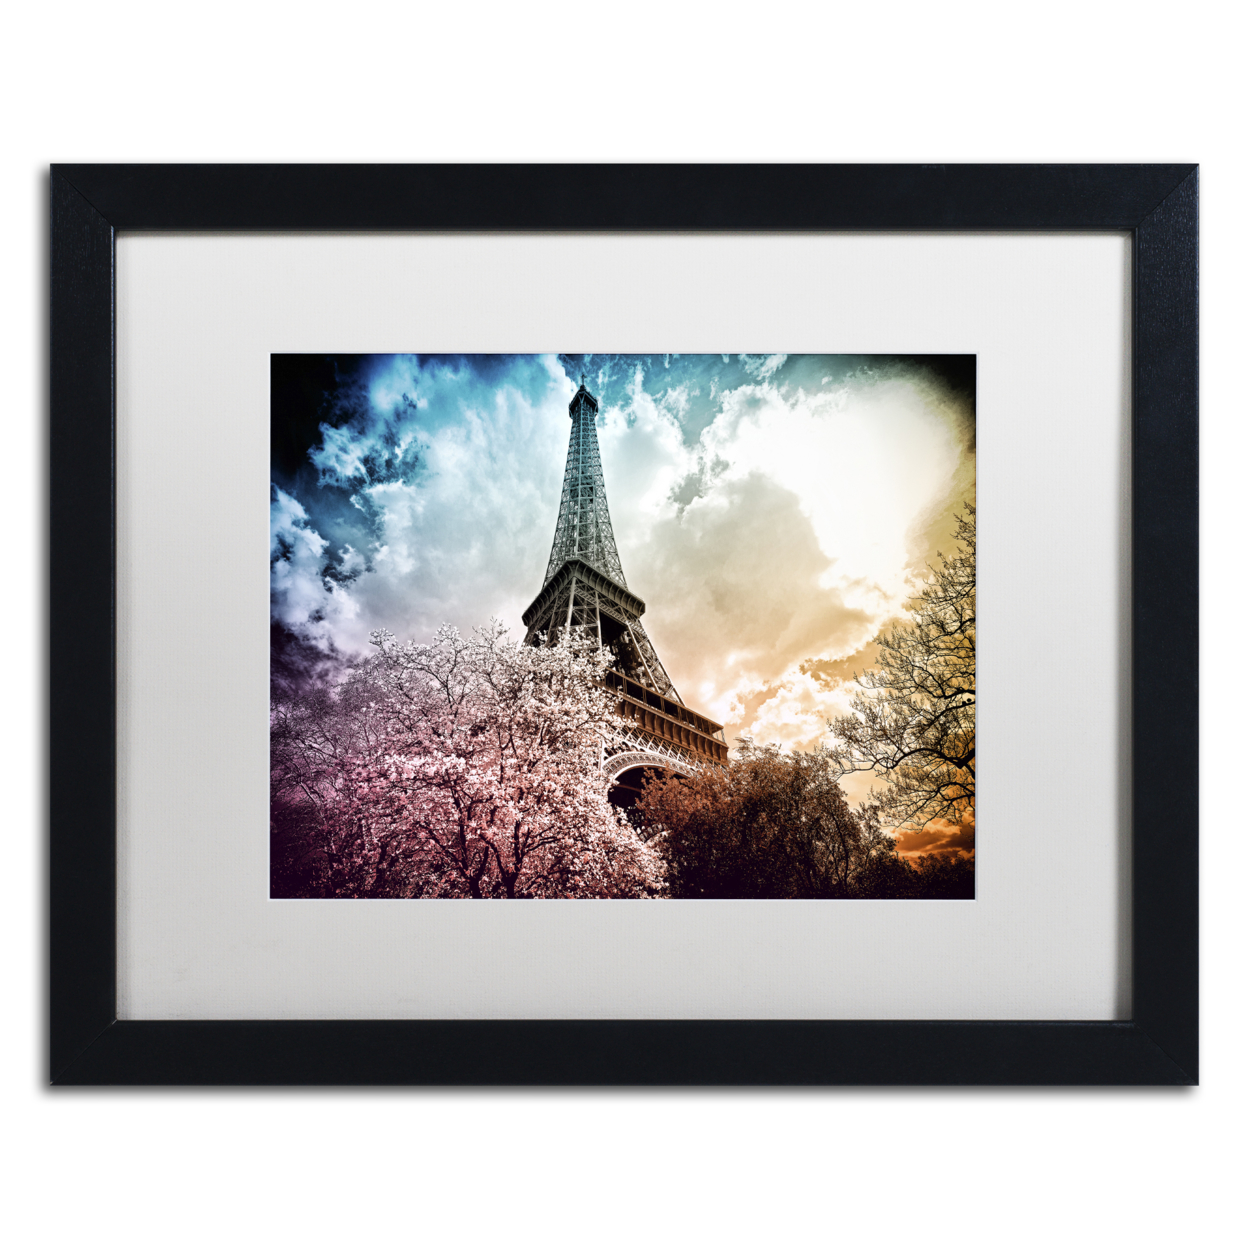 Philippe Hugonnard 'Eiffel Tower Color' Black Wooden Framed Art 18 X 22 Inches